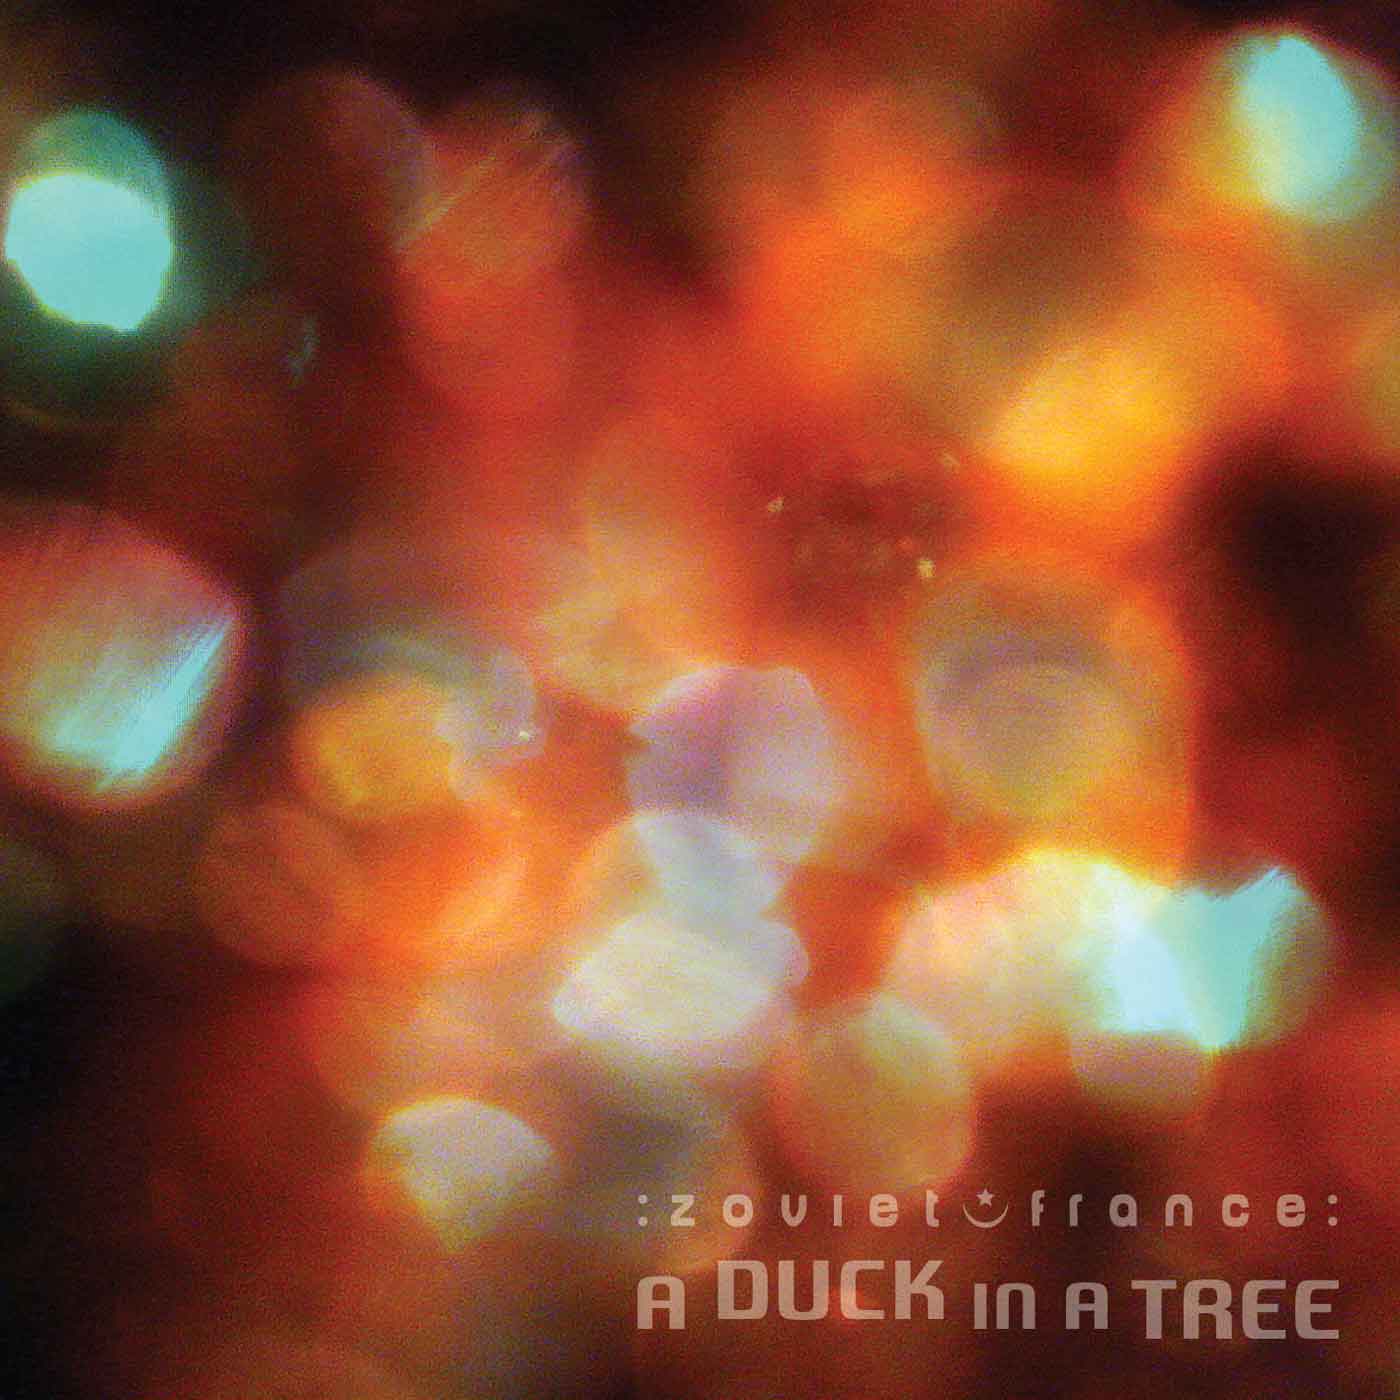 A Duck in a Tree 2014-11-29 | About the Bushbeat